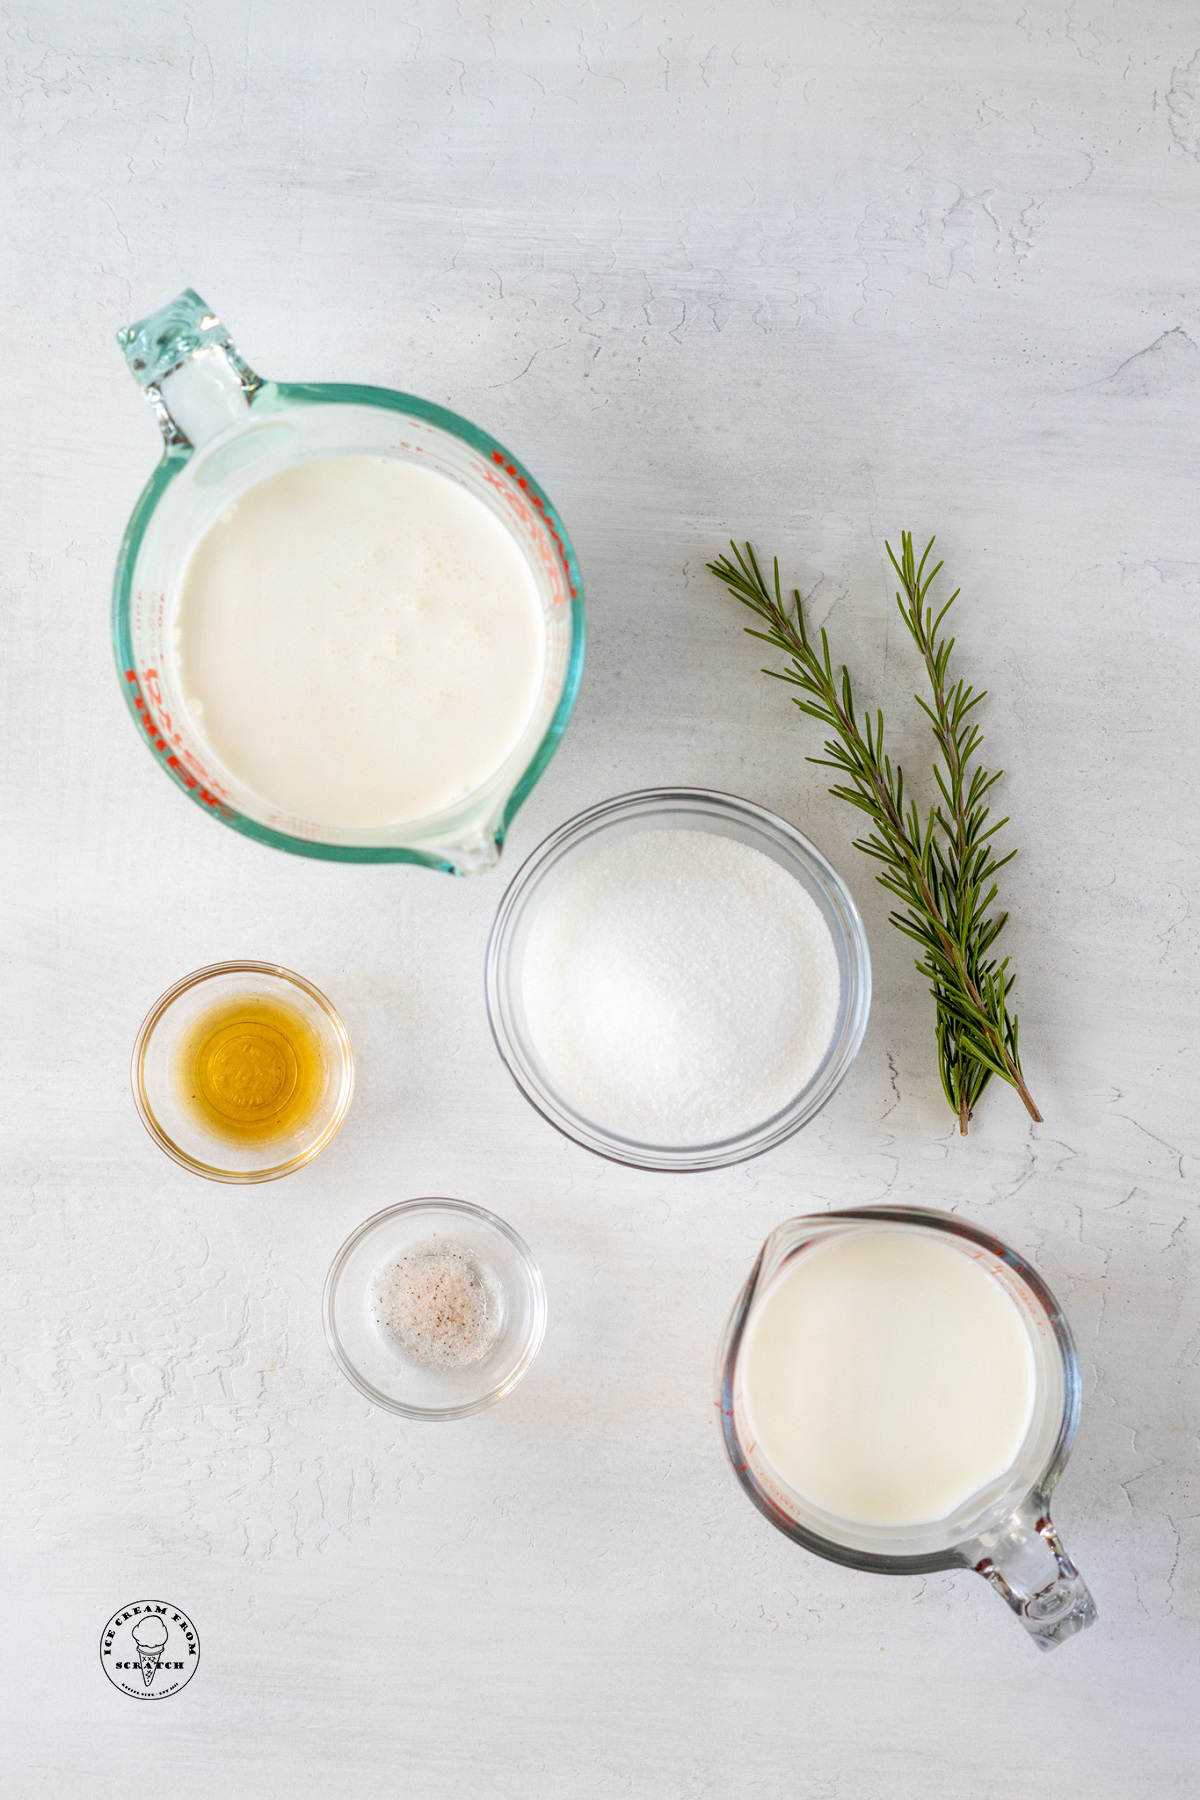 Milk, cream, sugar, salt, and vanilla, measured into glass bowls and measuring cups, next to two sprigs of rosemary on a stone counter.